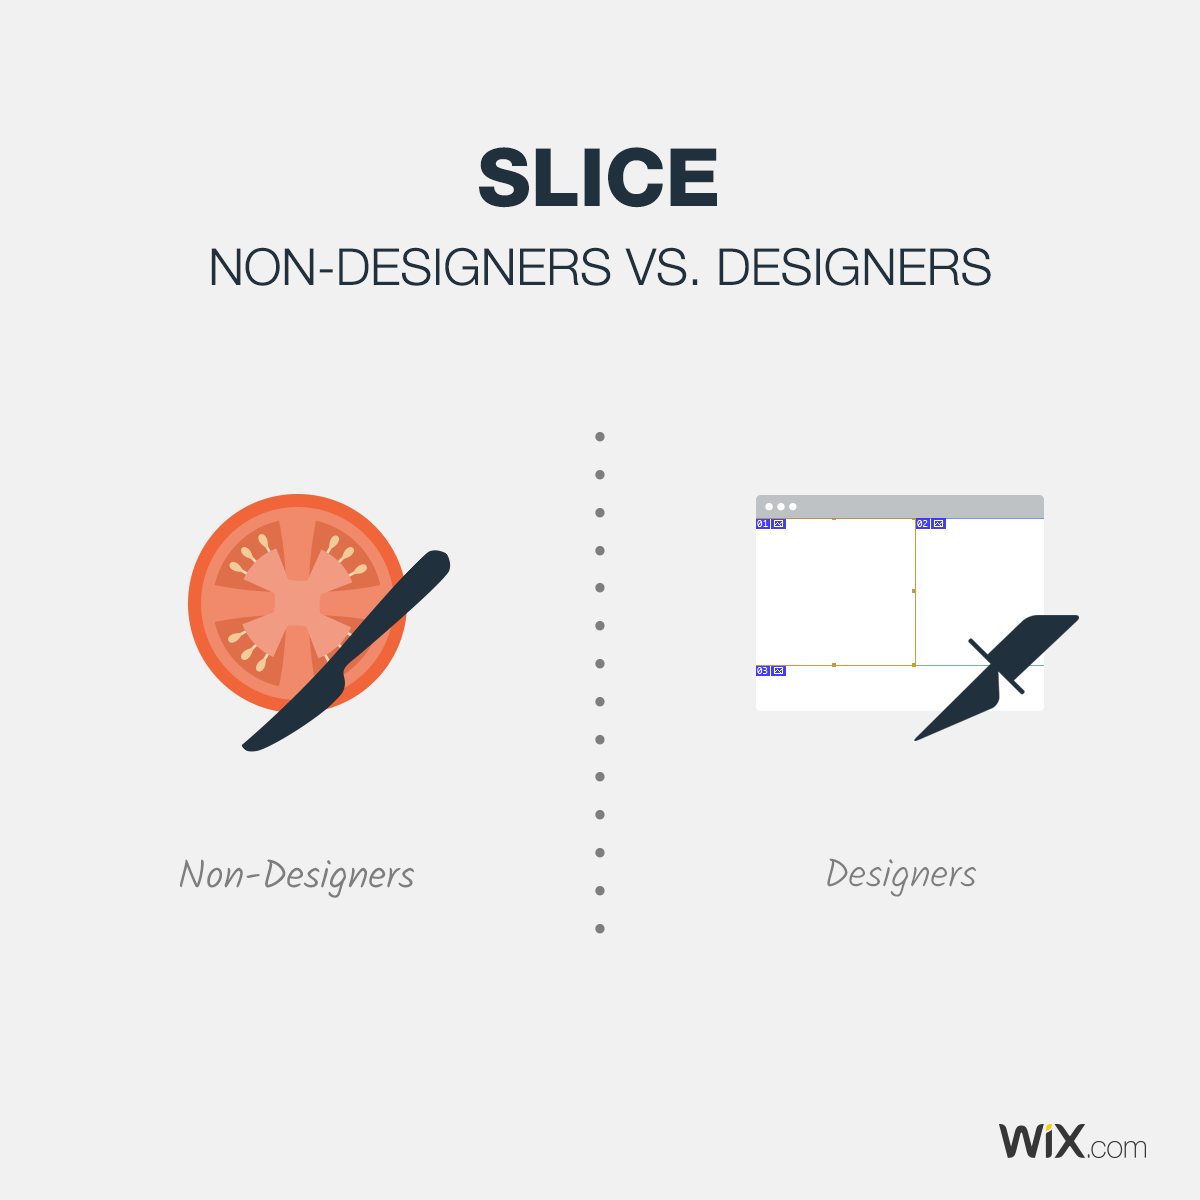 Differences Between Designers and Non-Designers - Slice